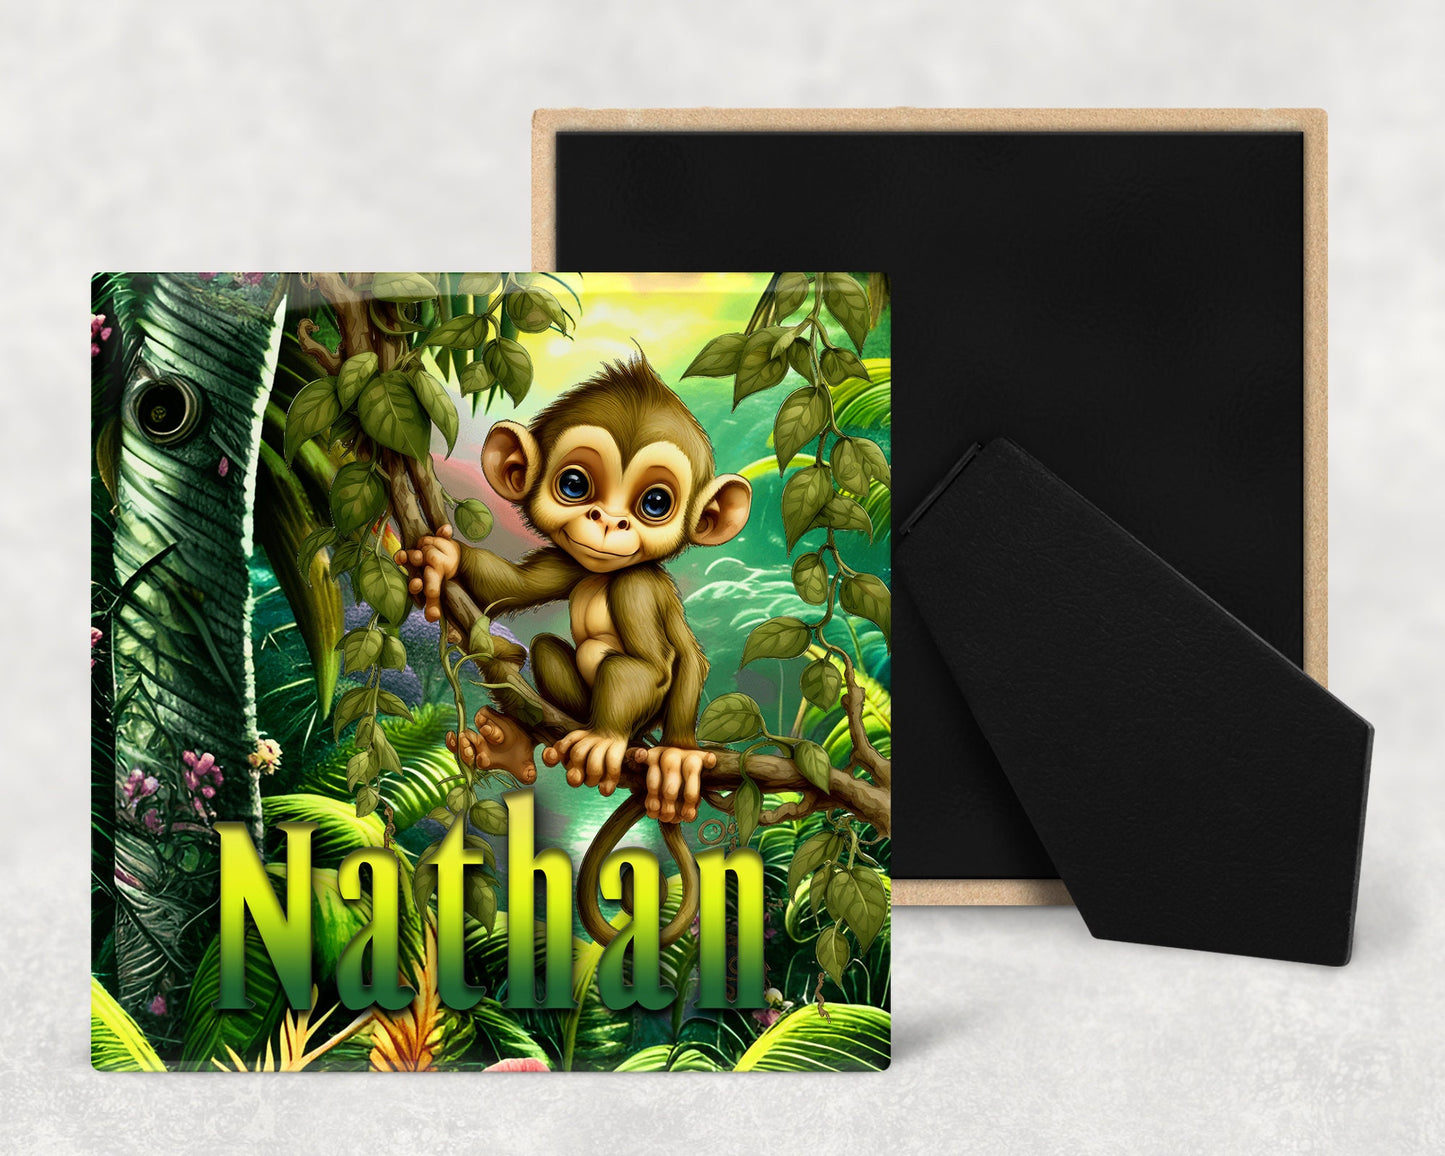 Cute Personalized Monkey Art Decorative Ceramic Tile Set with Optional Easel Back  - Available in 3 sizes